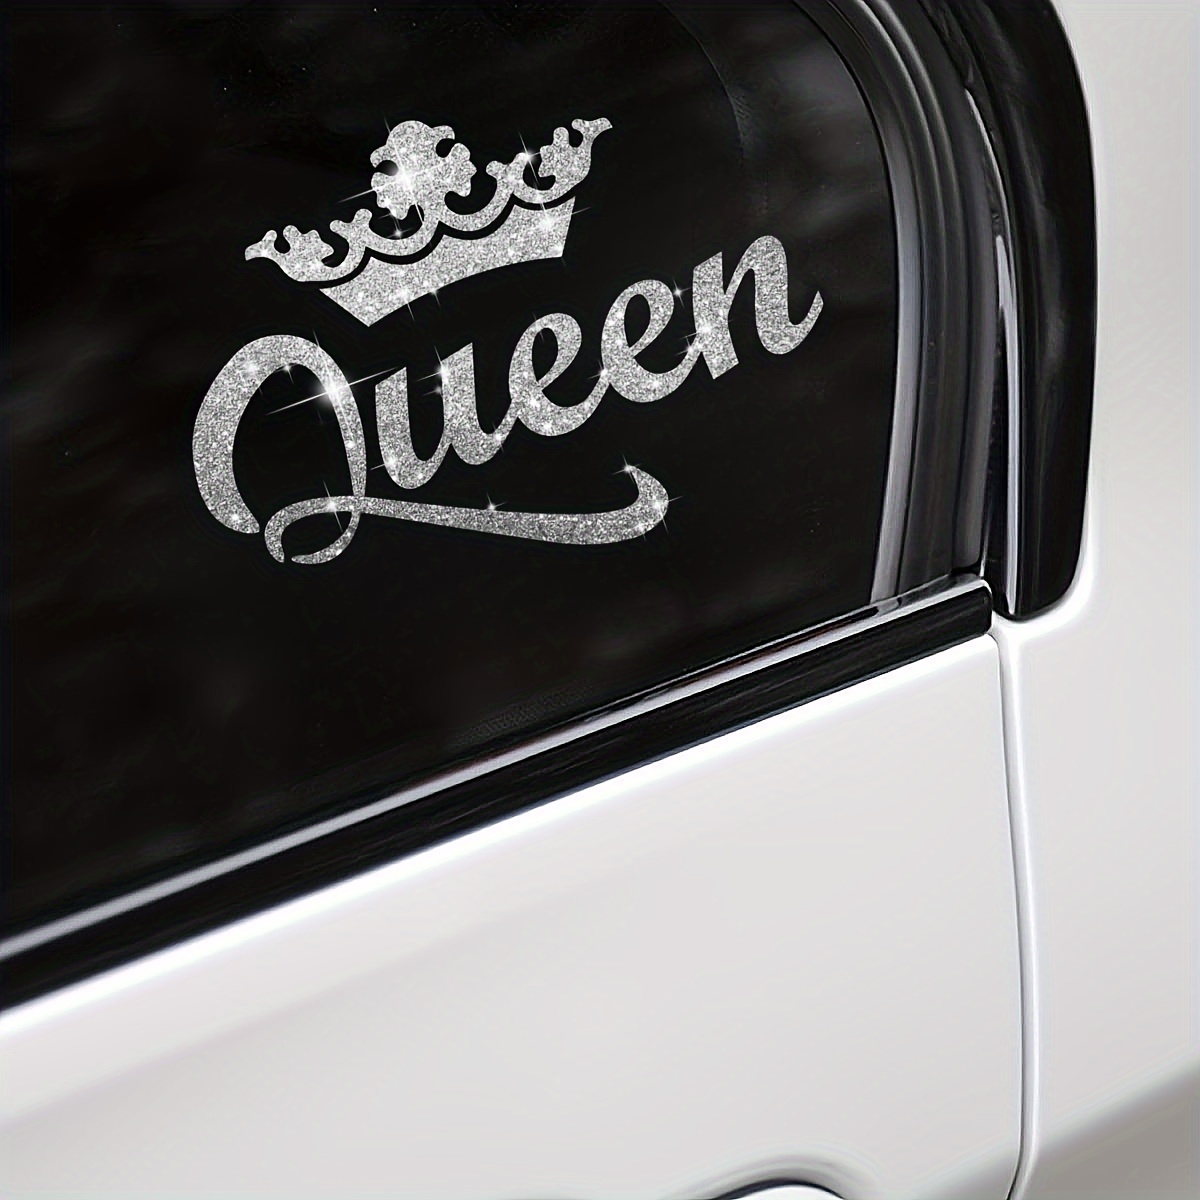 

1pc Crown Queen Car Stickers, Imitation Artificial Diamond Brightly Fashion Waterproof Vinyl Decal, Auto Sticker For Car Laptop Water Cup Window